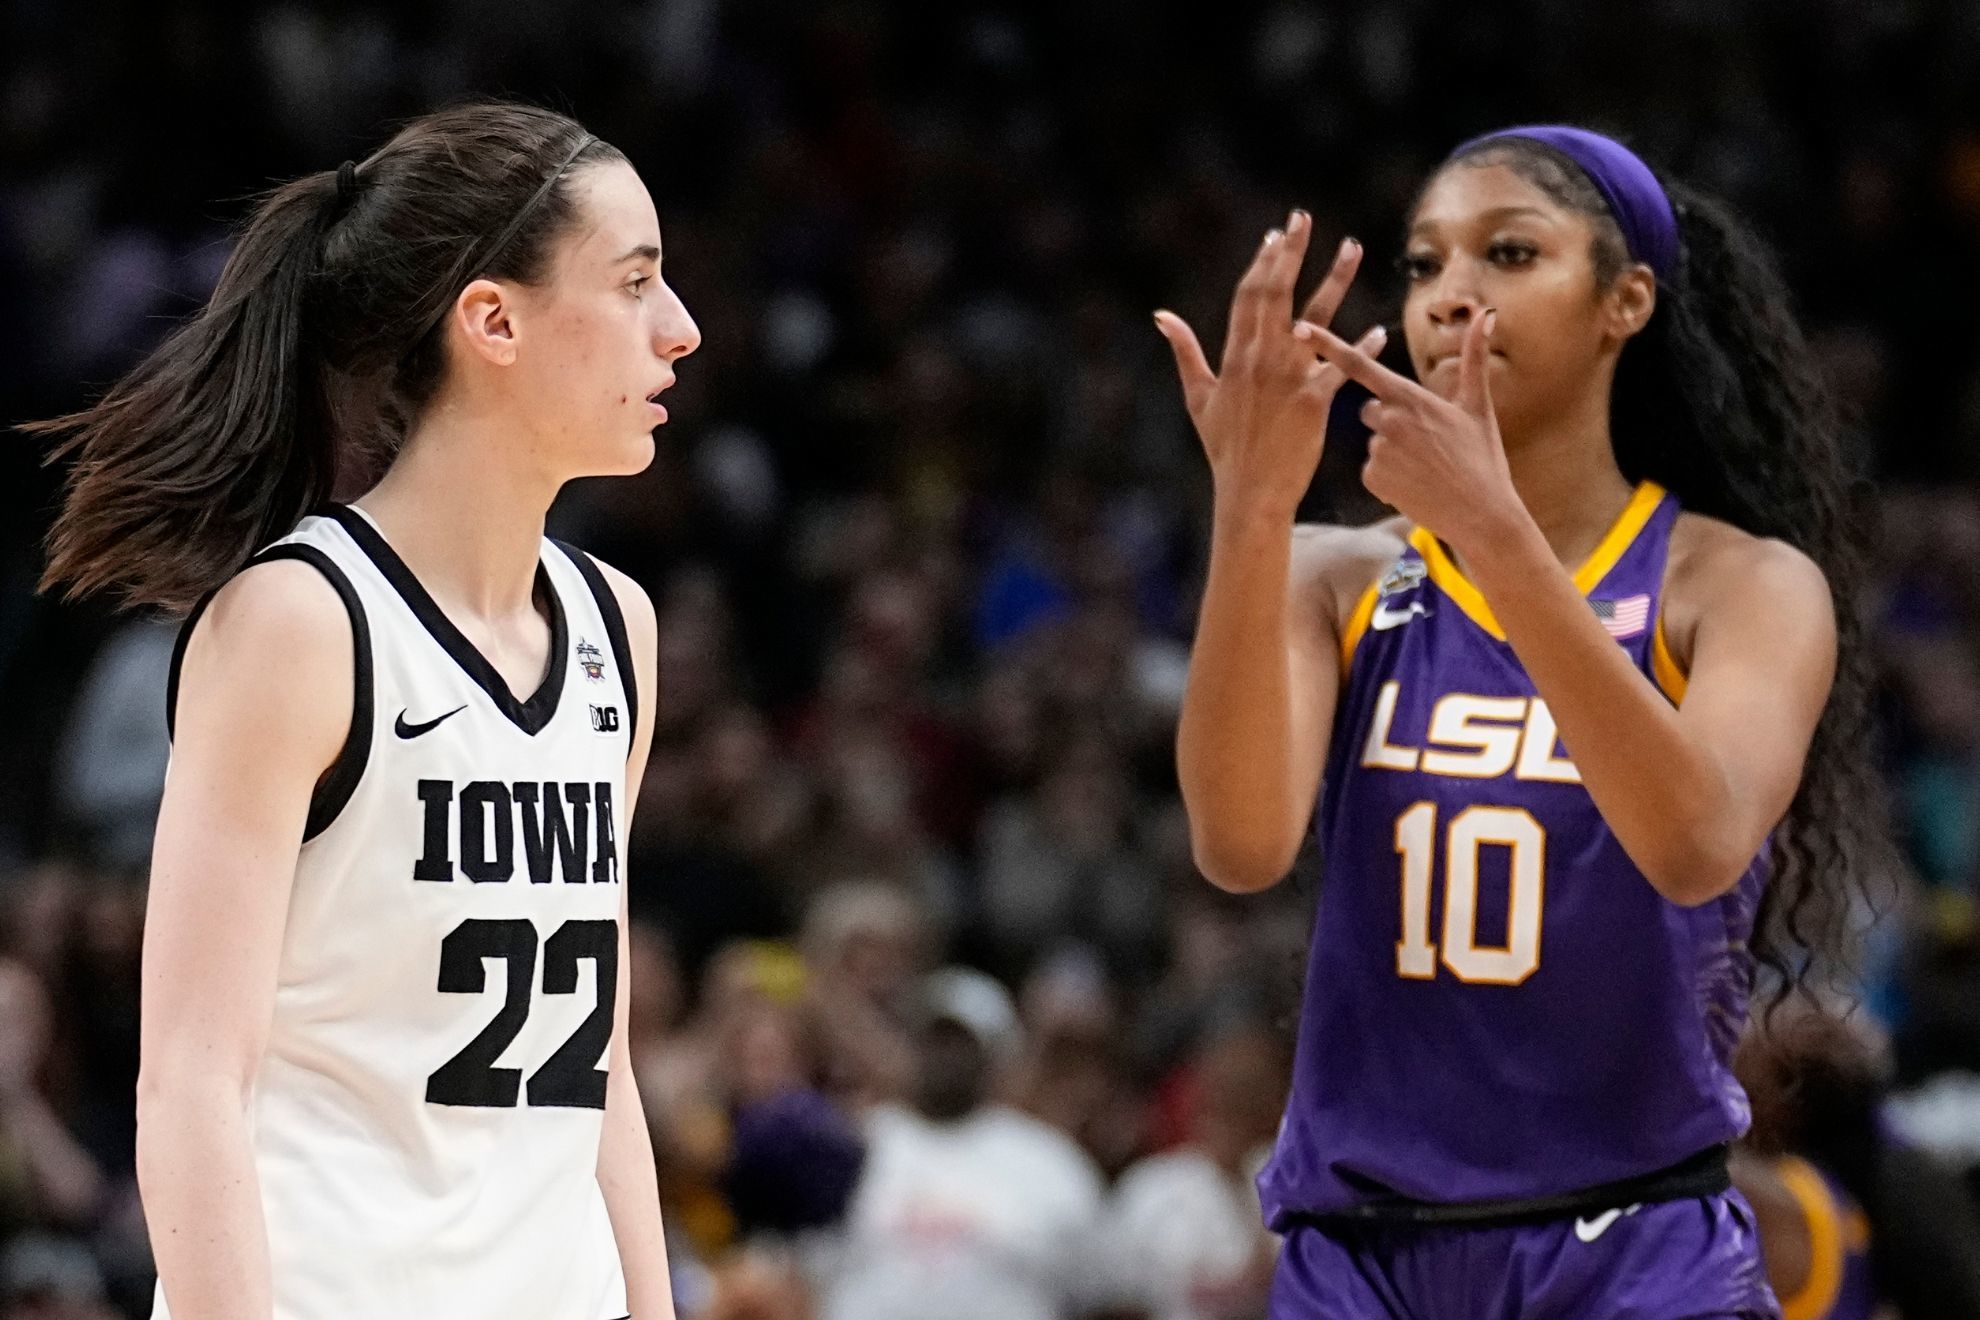 LSU forward Angel Reese taunts Iowa guard Caitlin Clark in final seconds of National Championship